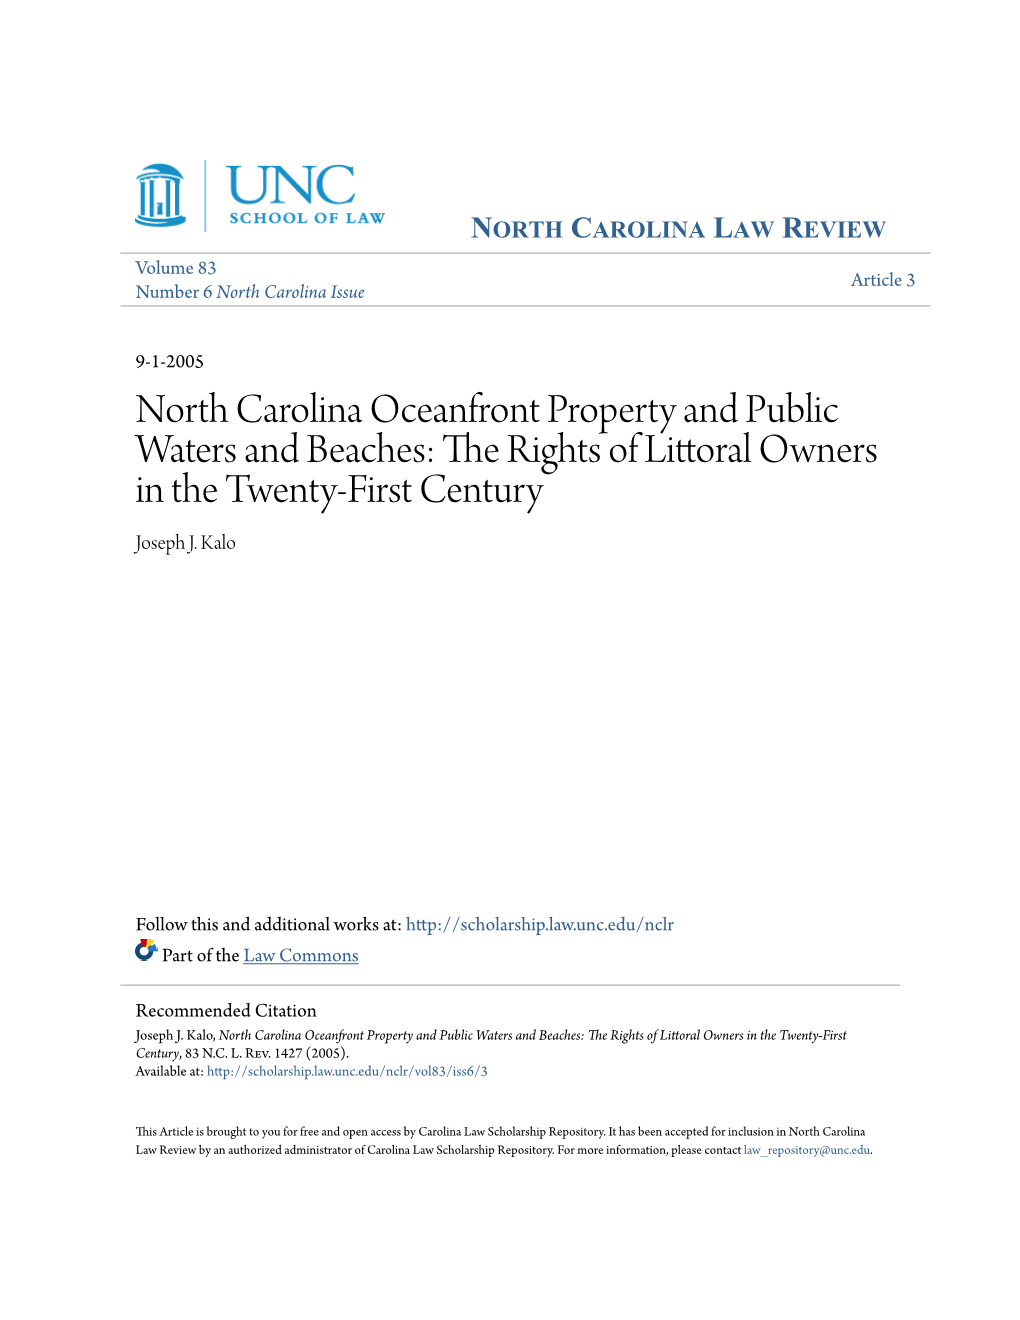 North Carolina Oceanfront Property and Public Waters and Beaches: the Rights of Littoral Owners in the Twenty-First Century Joseph J